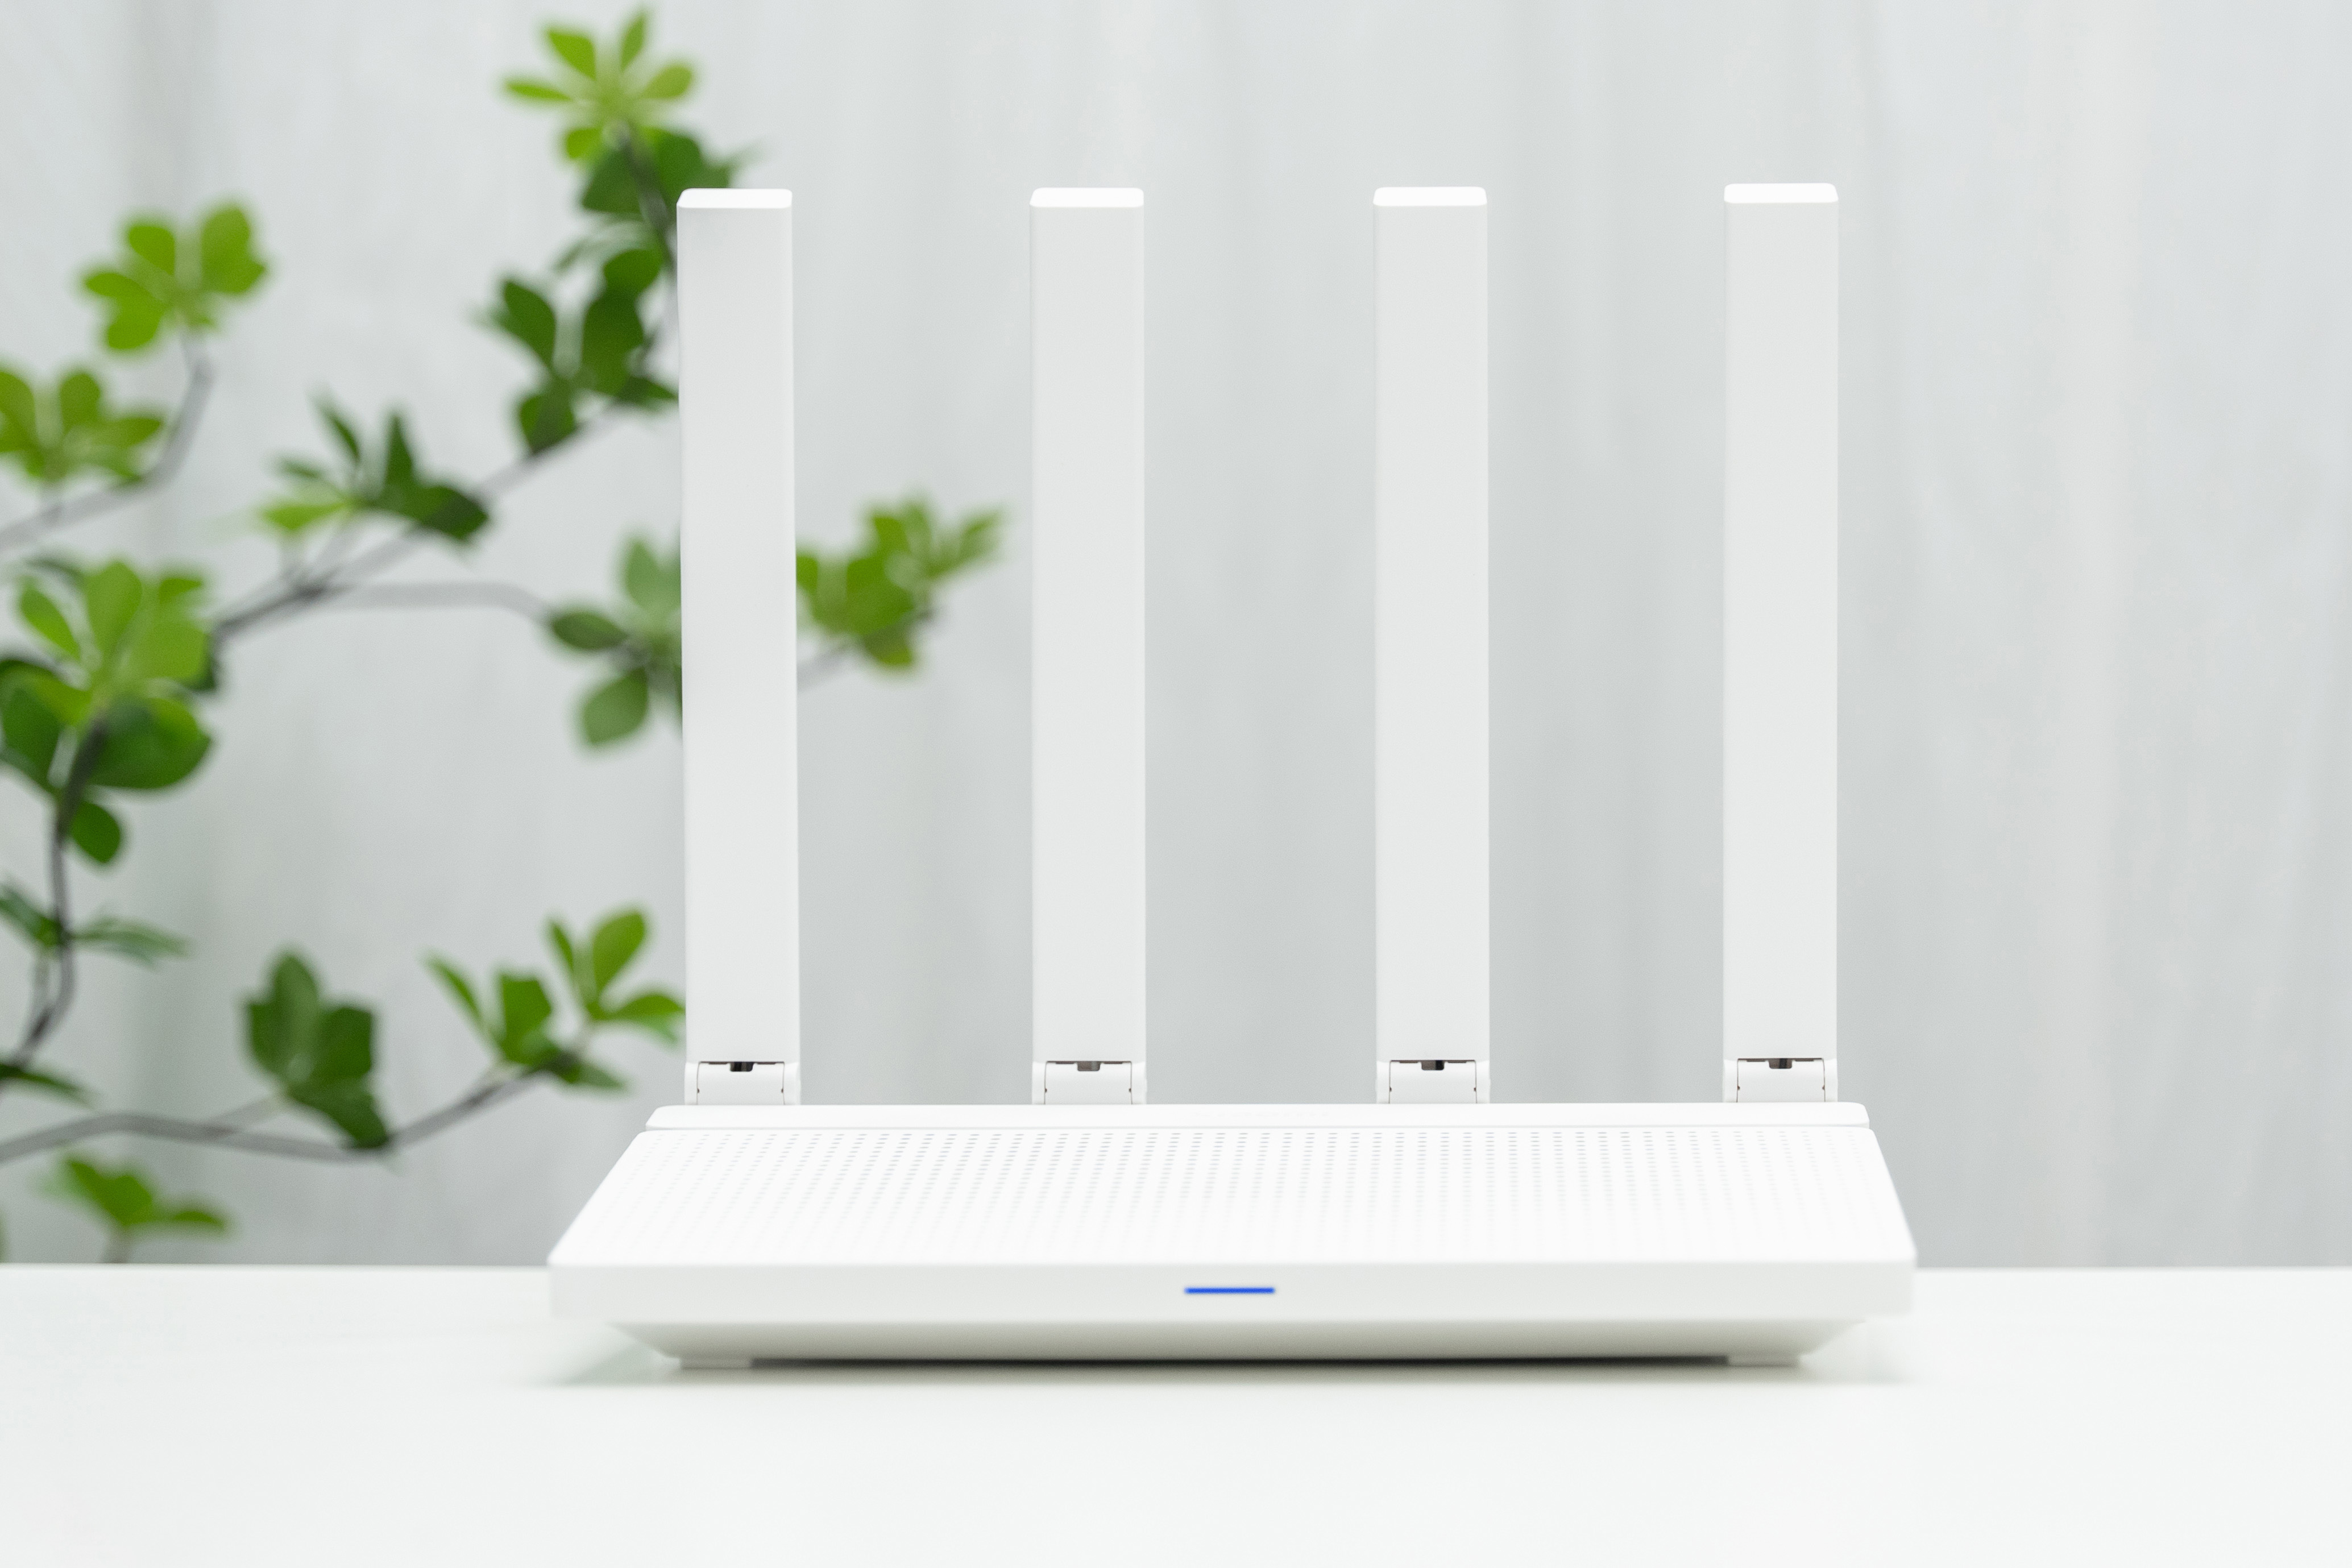 Xiaomi Router AX3000T Reviews: A sincere effort to popularize Wi-Fi 6